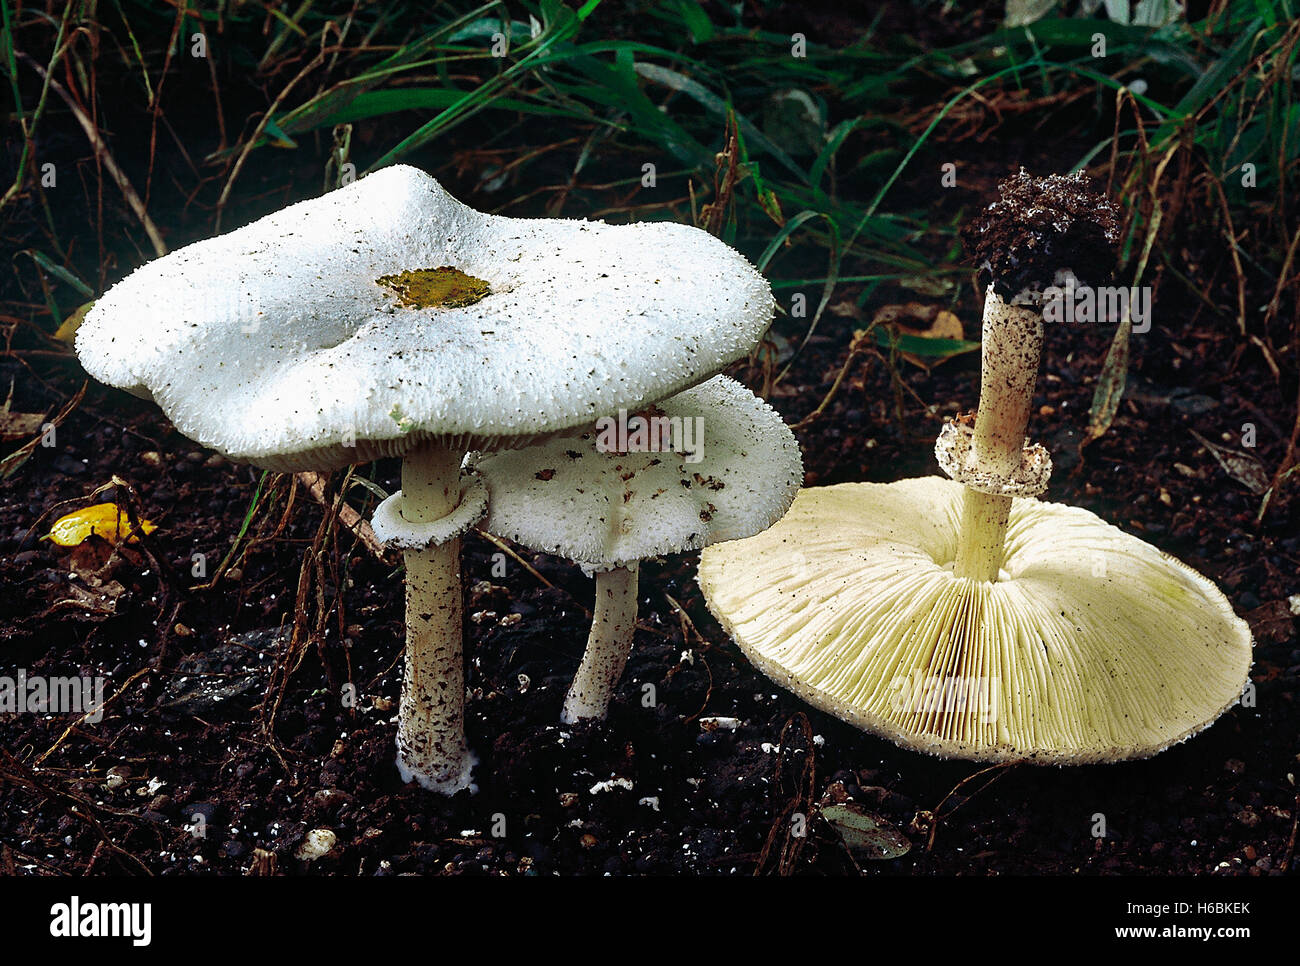 Chlorolepiota sp. Class: Homobasidiomycetes . Series: Hymenomycetes. Order: Agaricales. A poisonous mushroom with green spores Stock Photo